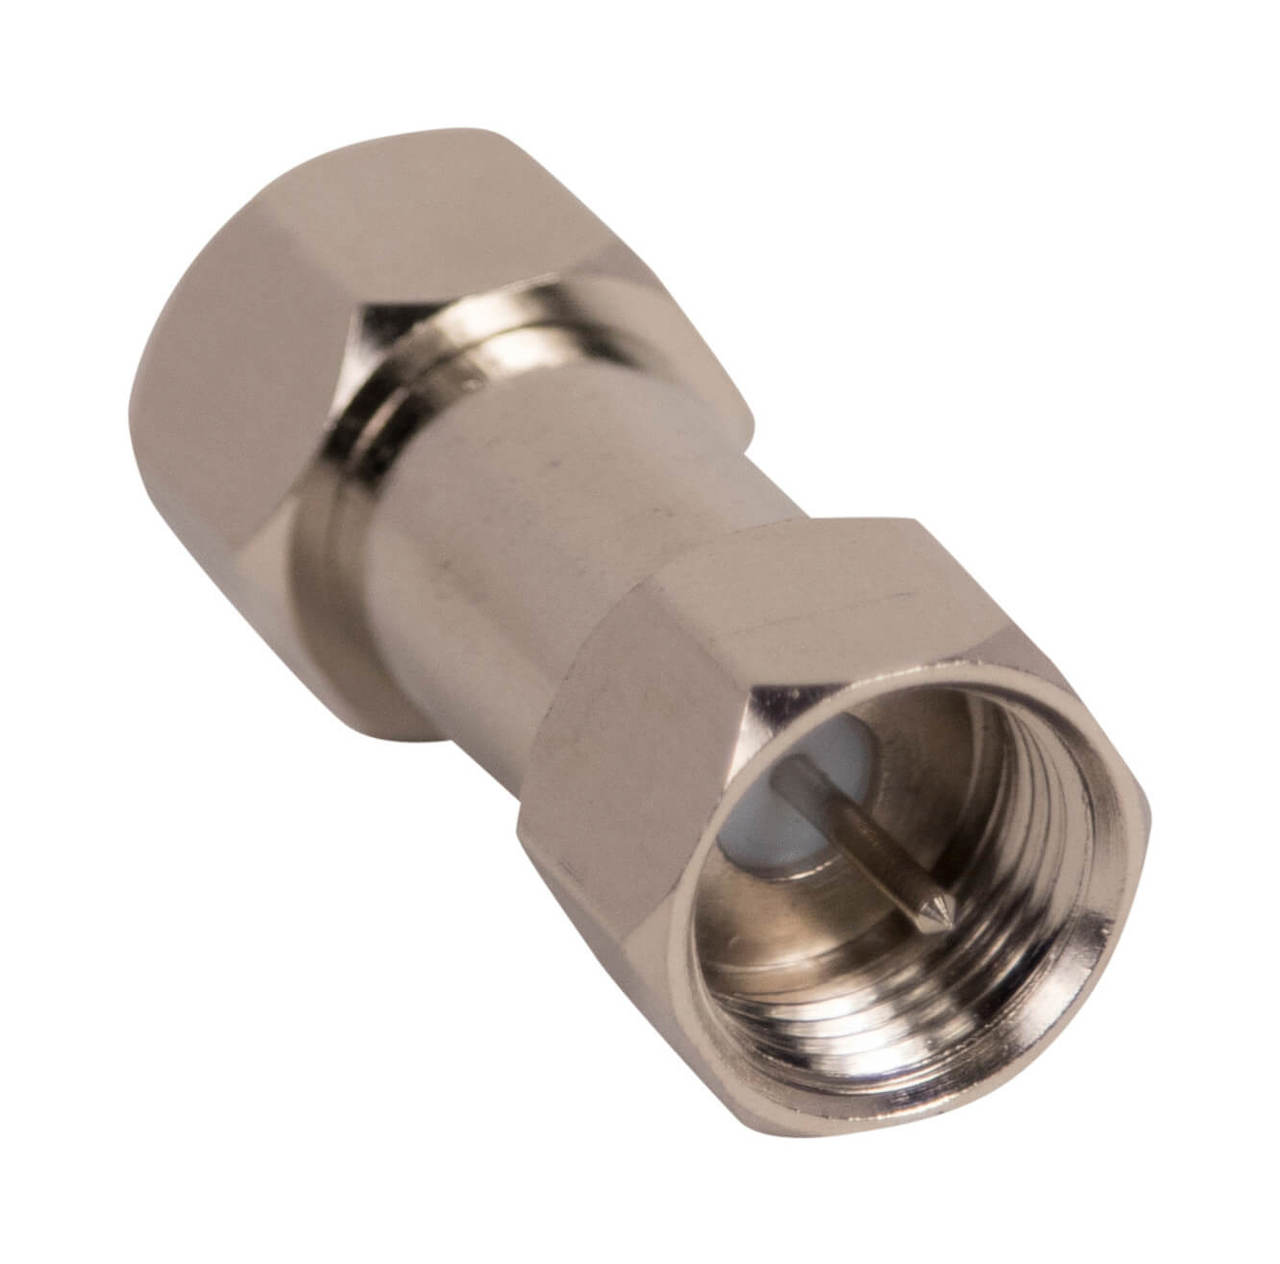 male to male barrel connector for RB6 cables